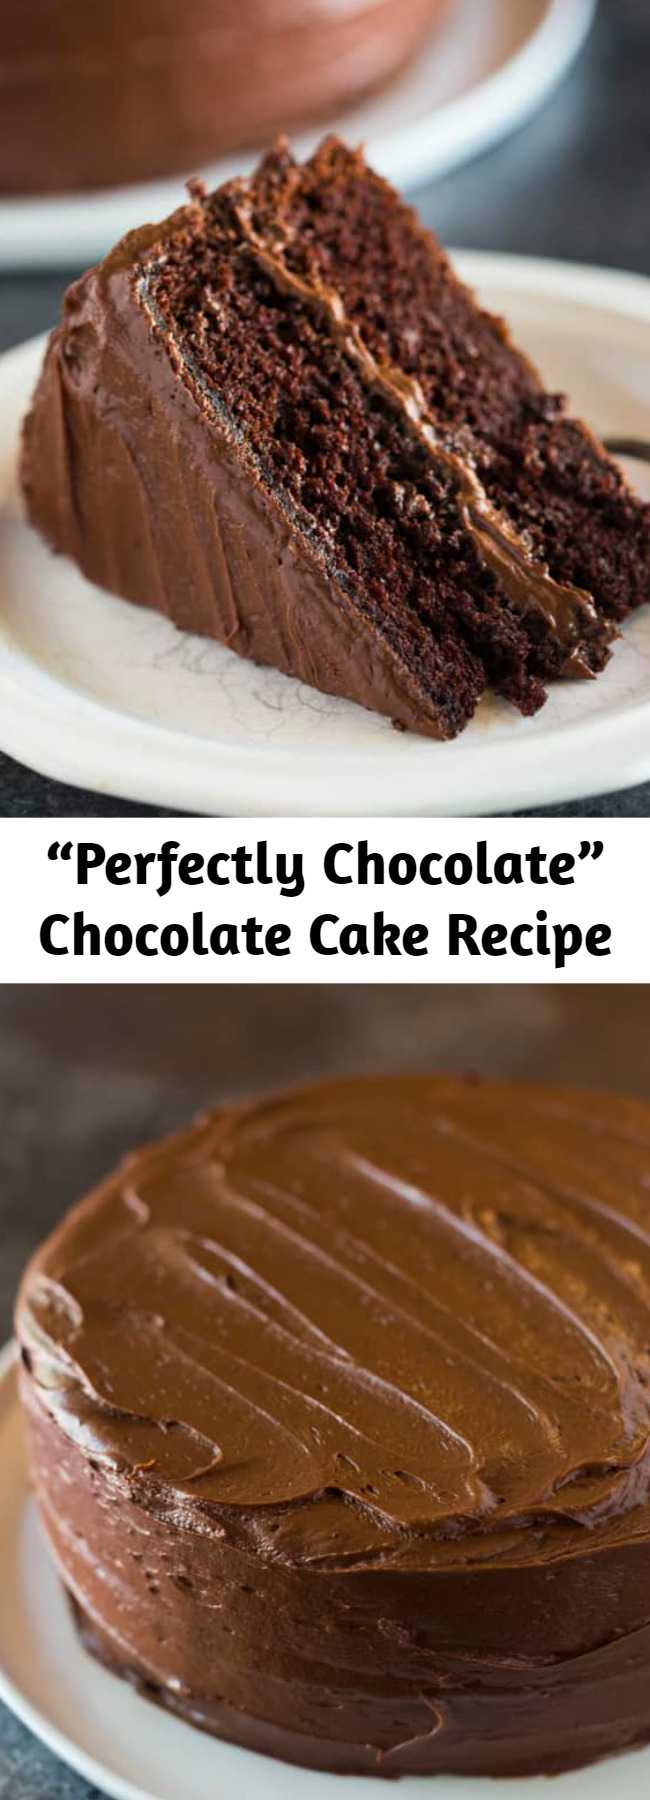 “Perfectly Chocolate” Chocolate Cake with 5 ingredient chocolate frosting is our favorite homemade chocolate cake recipe! Extra moist, with a perfect rich chocolate flavor and tender, smooth crumb.